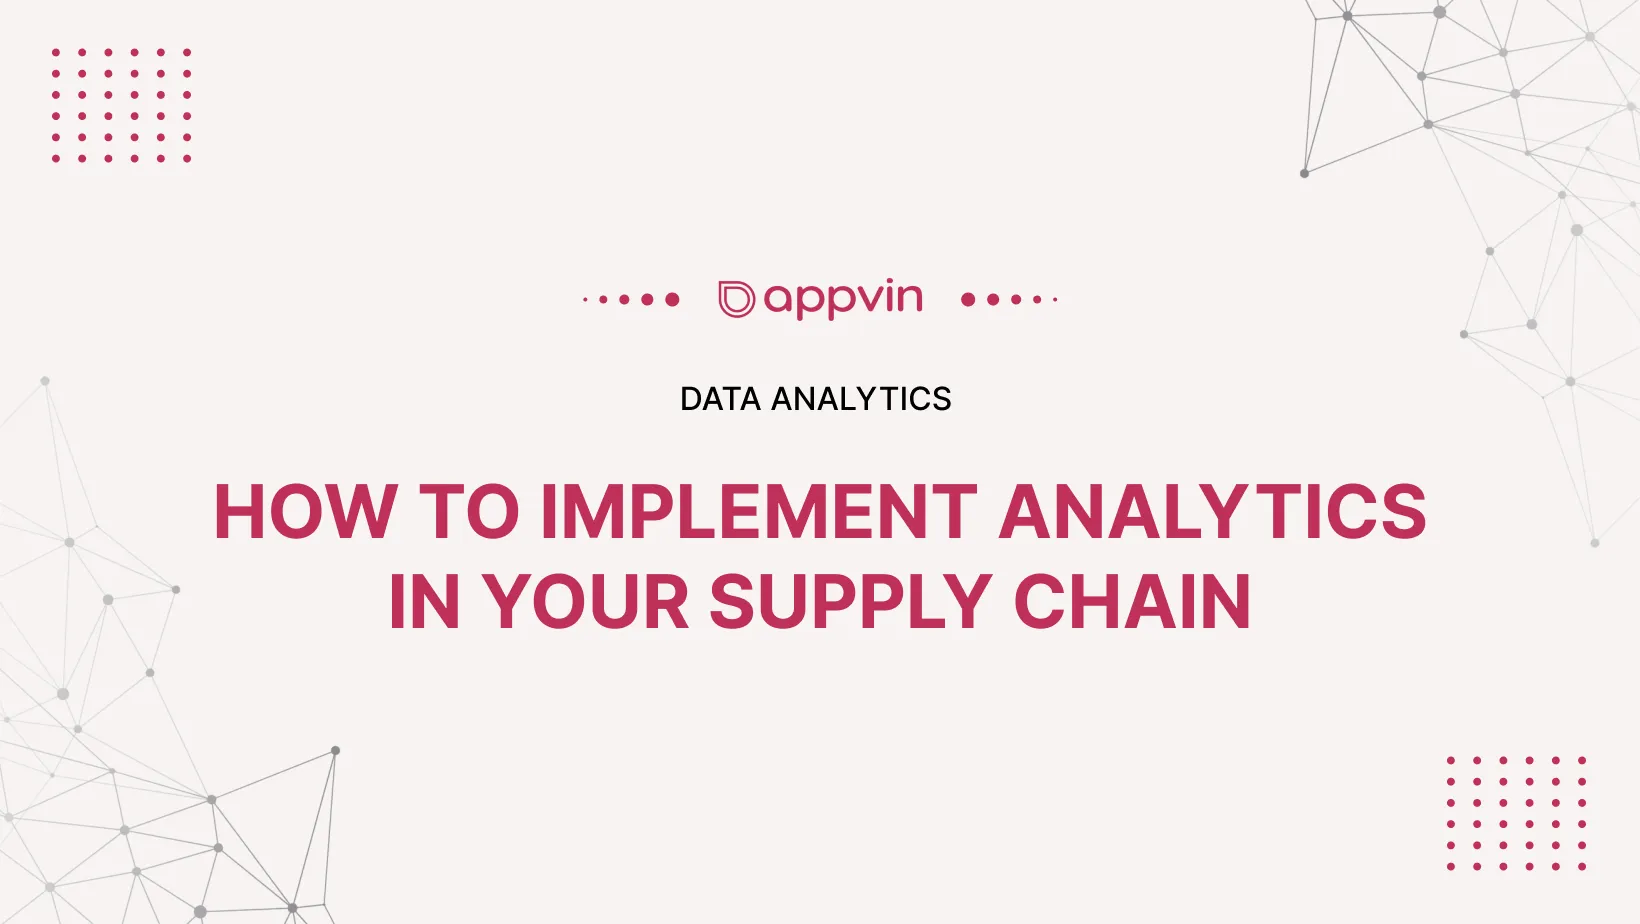 How to implement analytics in your supply chain